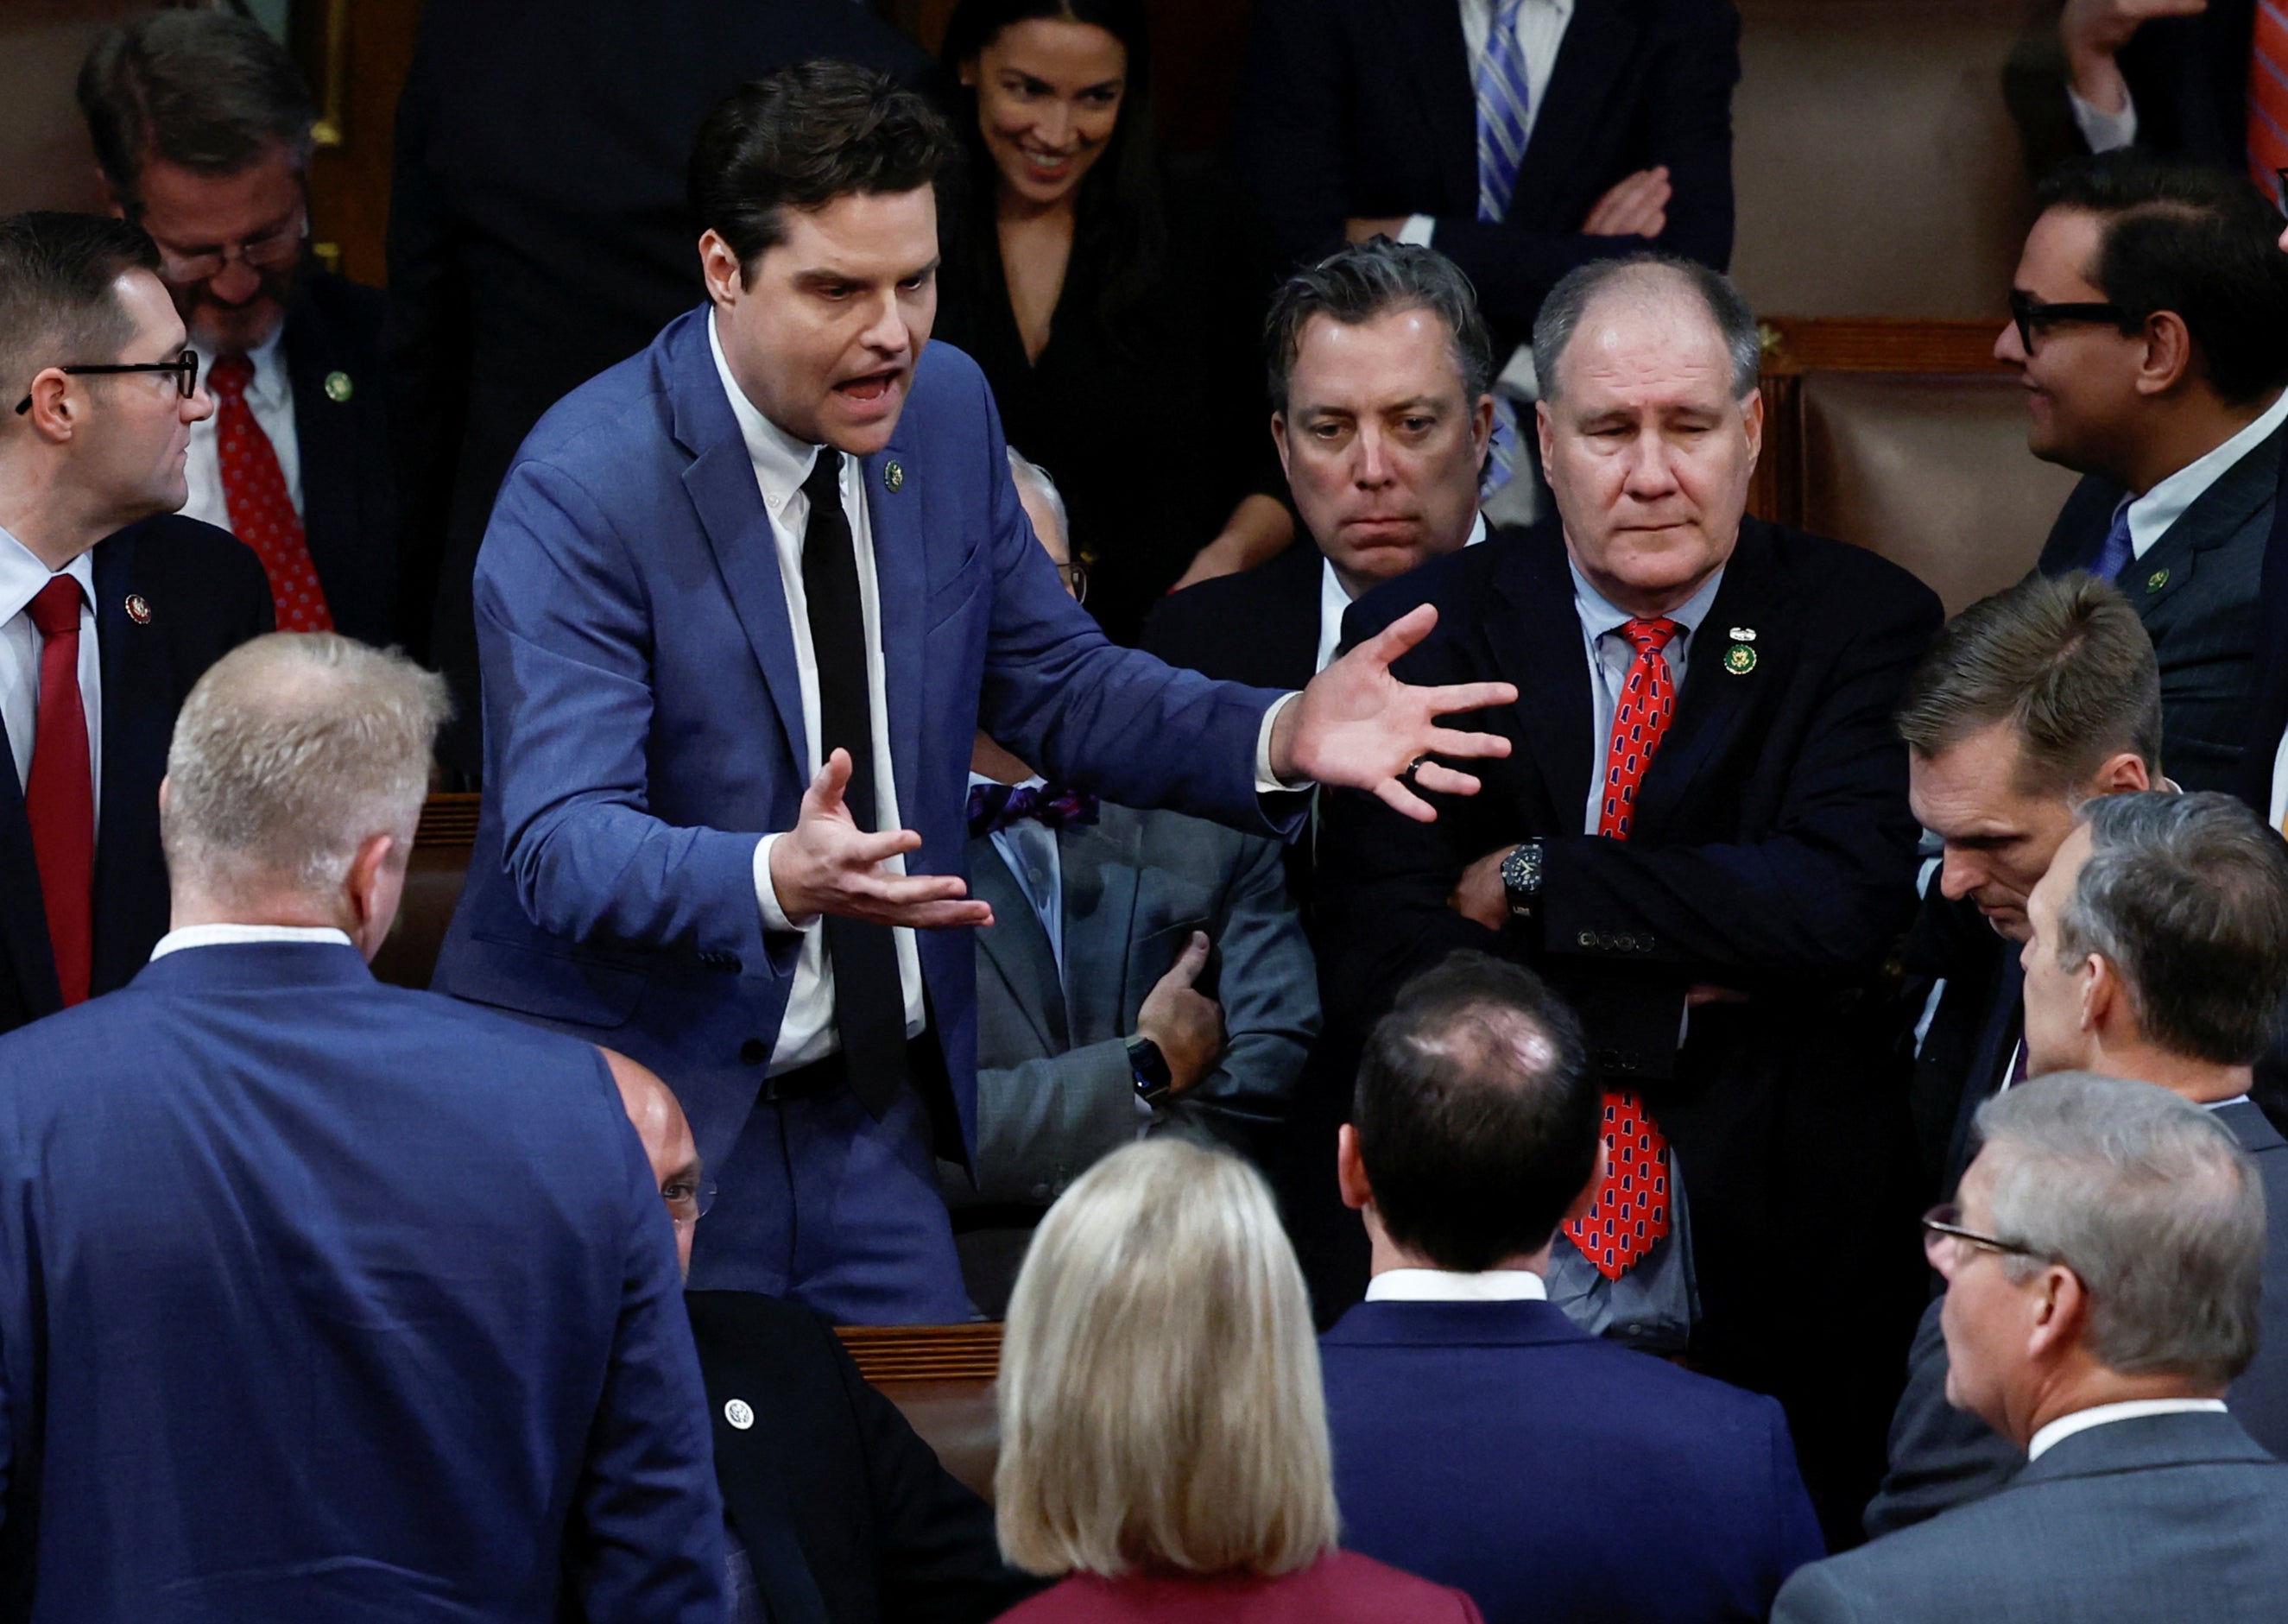 Matt Gaetz passionately addresses other conservative Republican members of the House in the middle of the House Chamber after a fourth round of voting still failed to elect US House Republican Leader Kevin McCarthy as new Speaker of the House